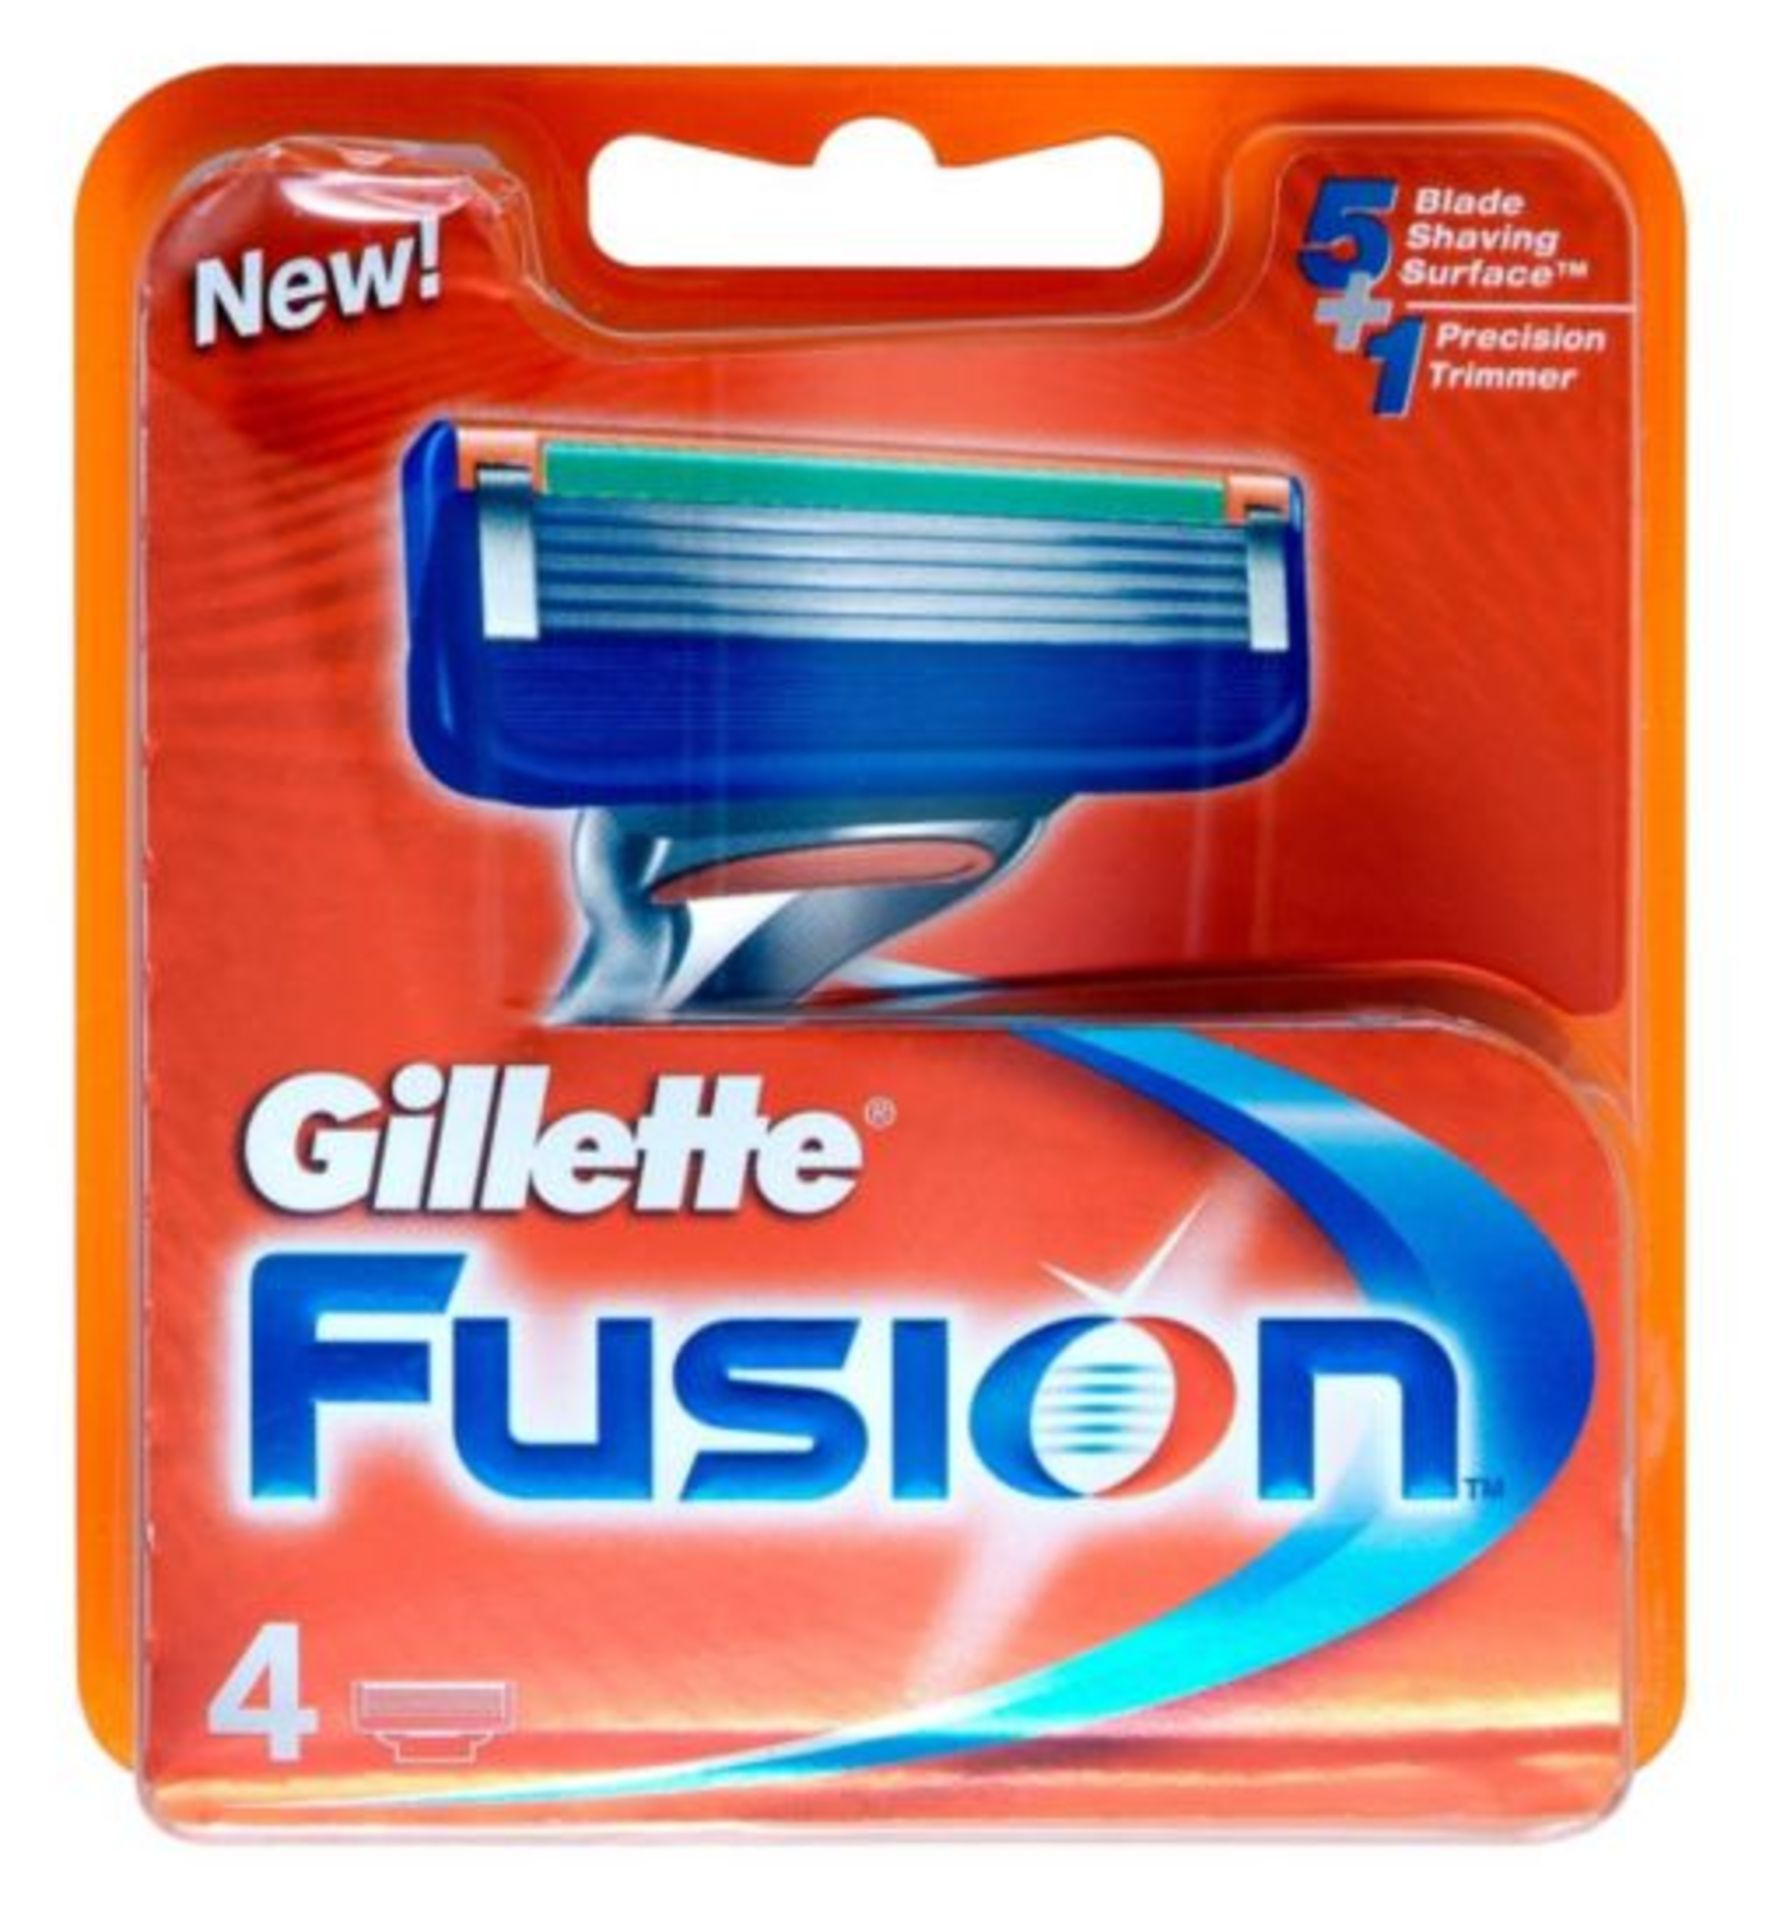 V Brand New Gillette Fusion Razor Blades 4 Pack RRP: £13.98 X100 Bid price to be multiplied by One